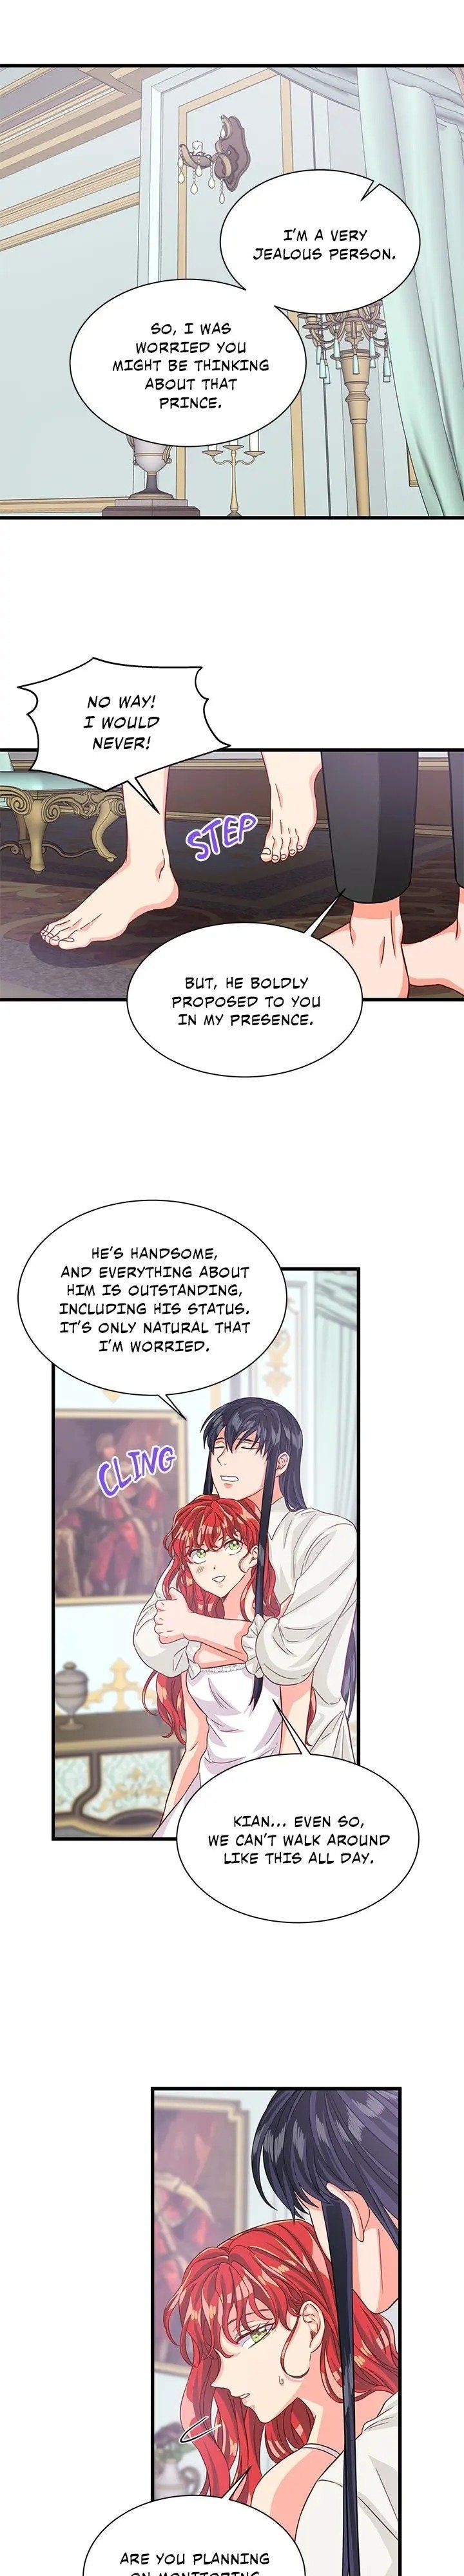 Priscilla's Marriage Request Chapter 47 page 4